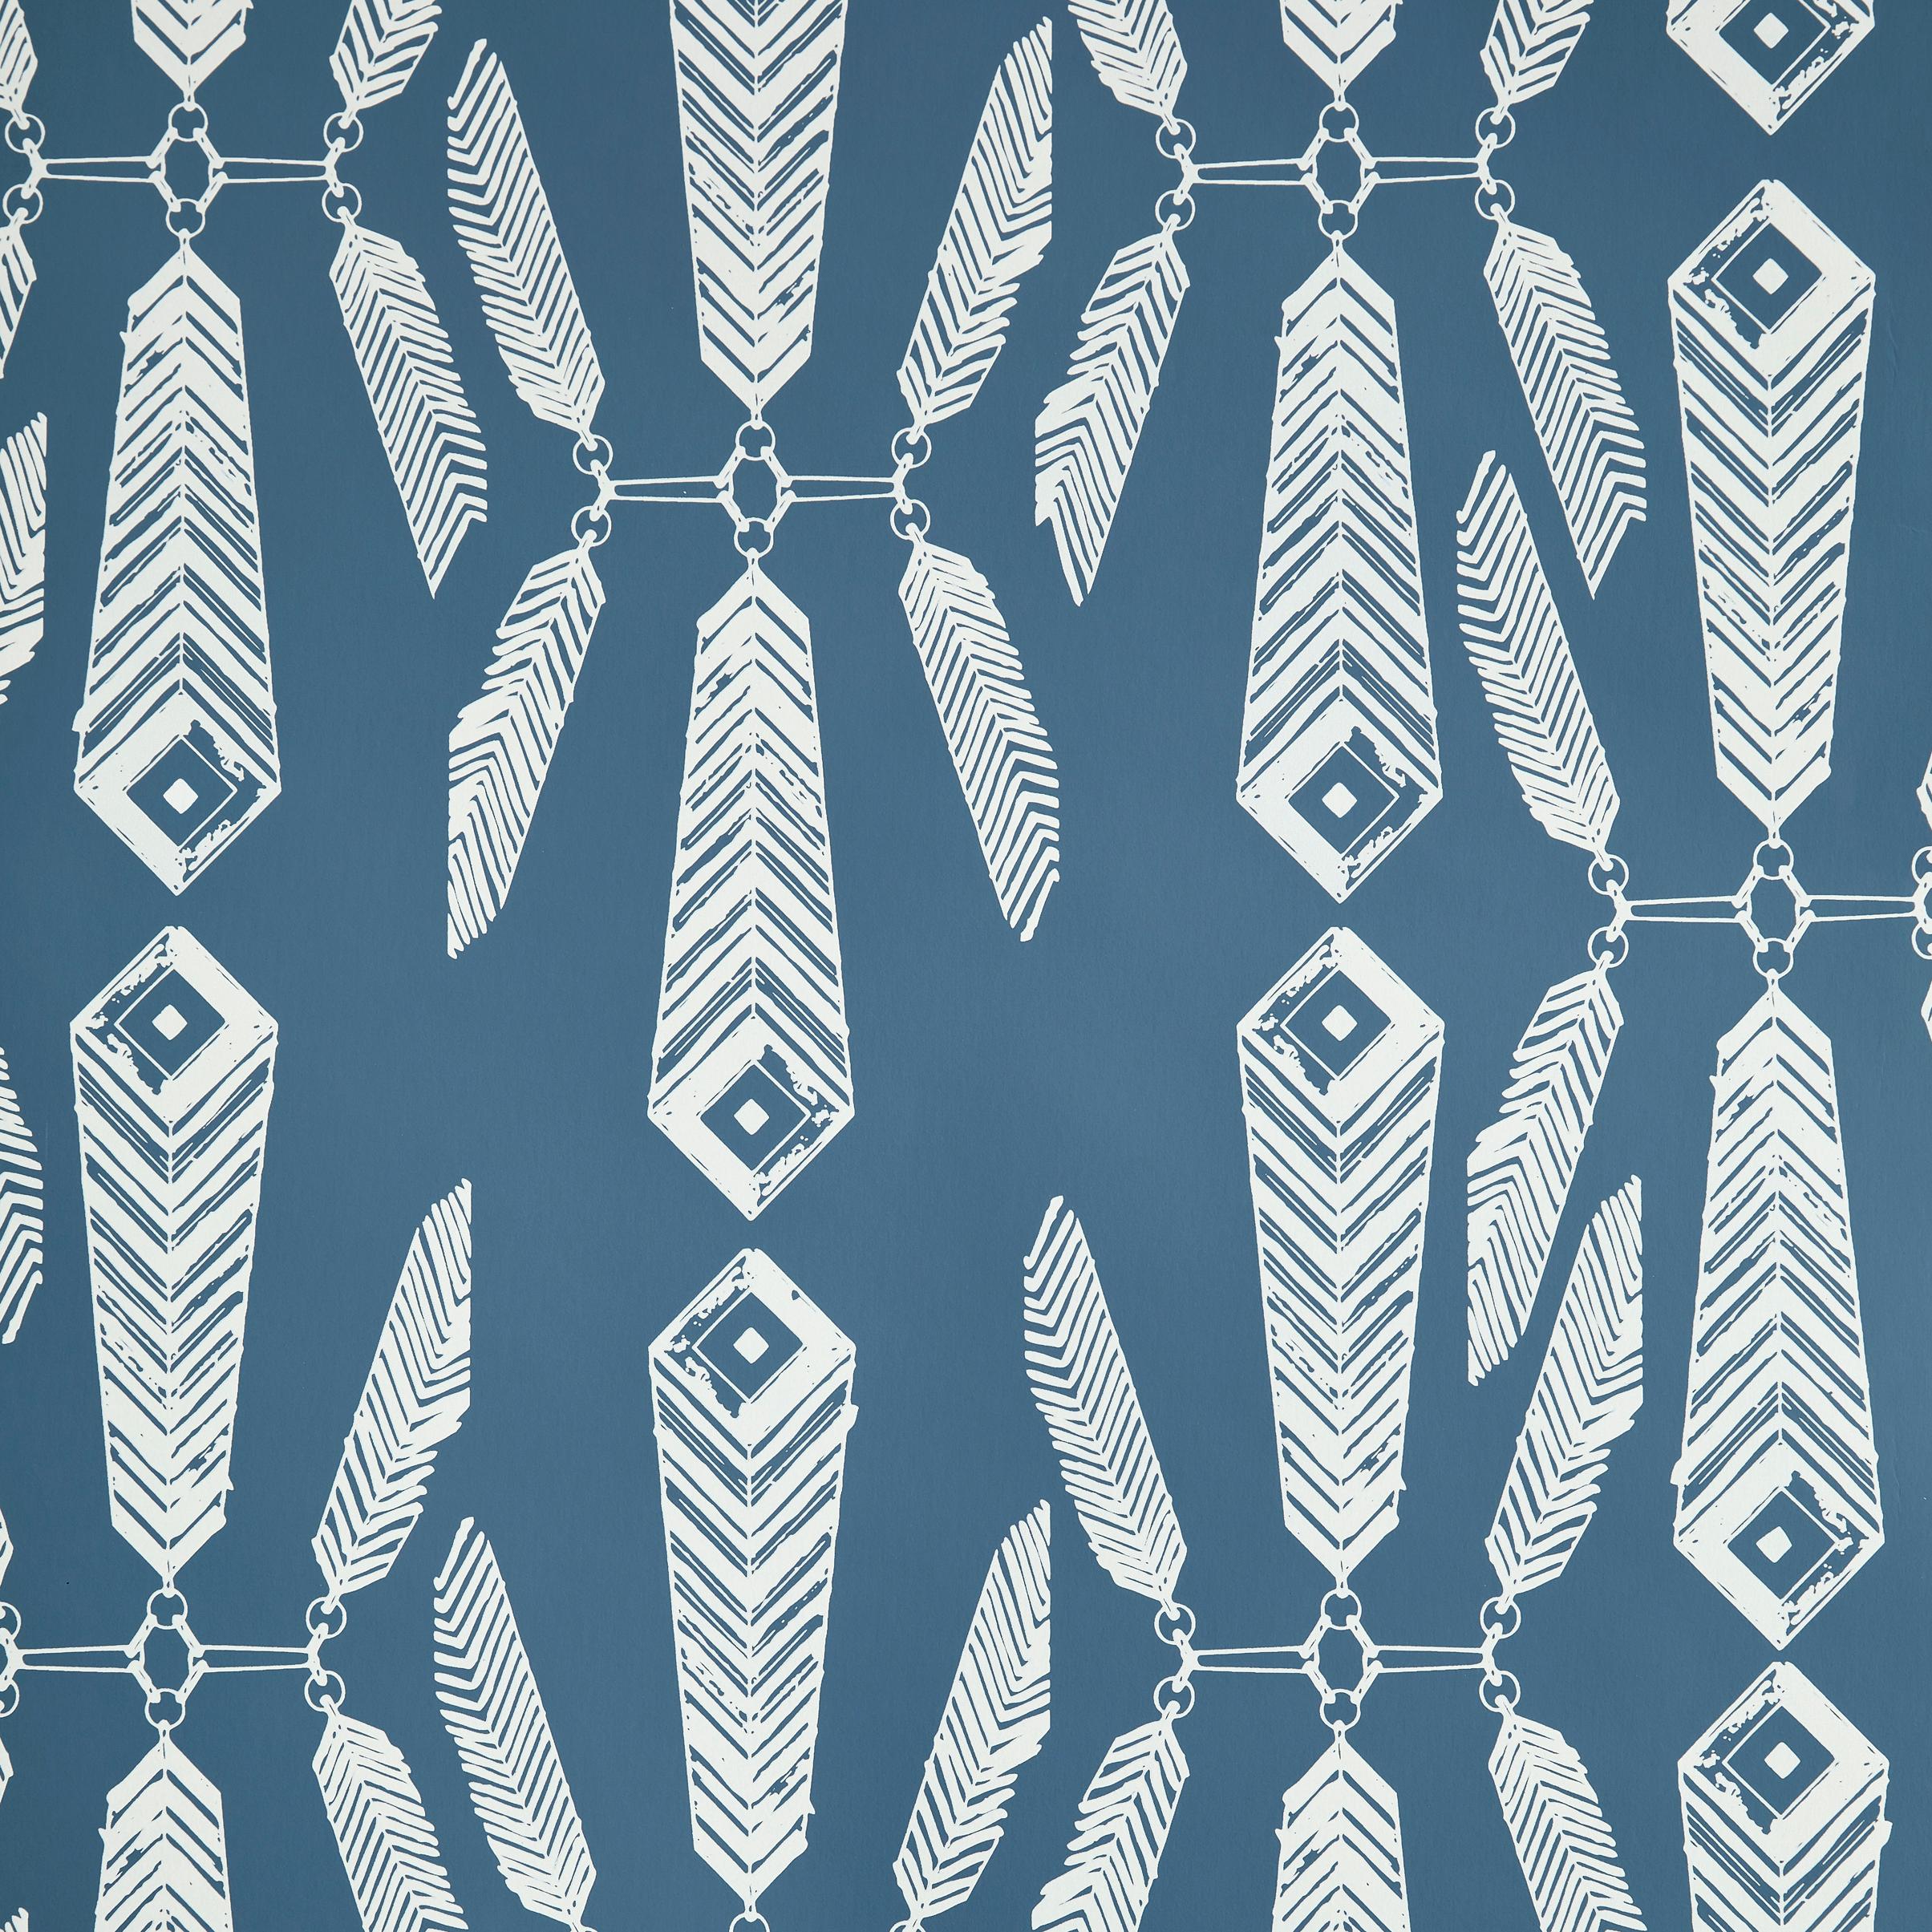 Contemporary Indian Summer Designer Wallpaper in Lagoon 'White on Aegean Blue' For Sale